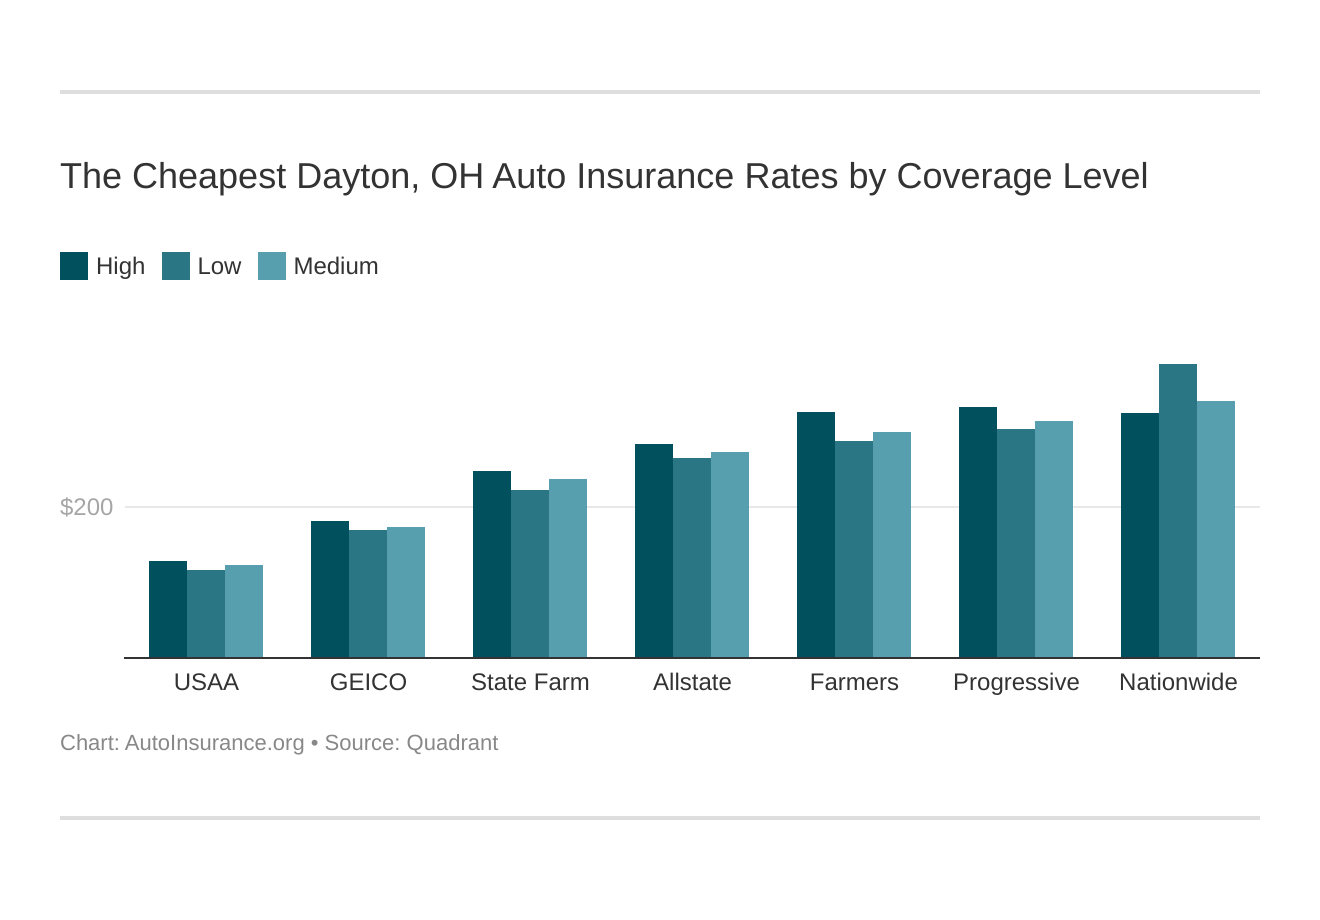 The Cheapest Dayton, OH Auto Insurance Rates by Coverage Level